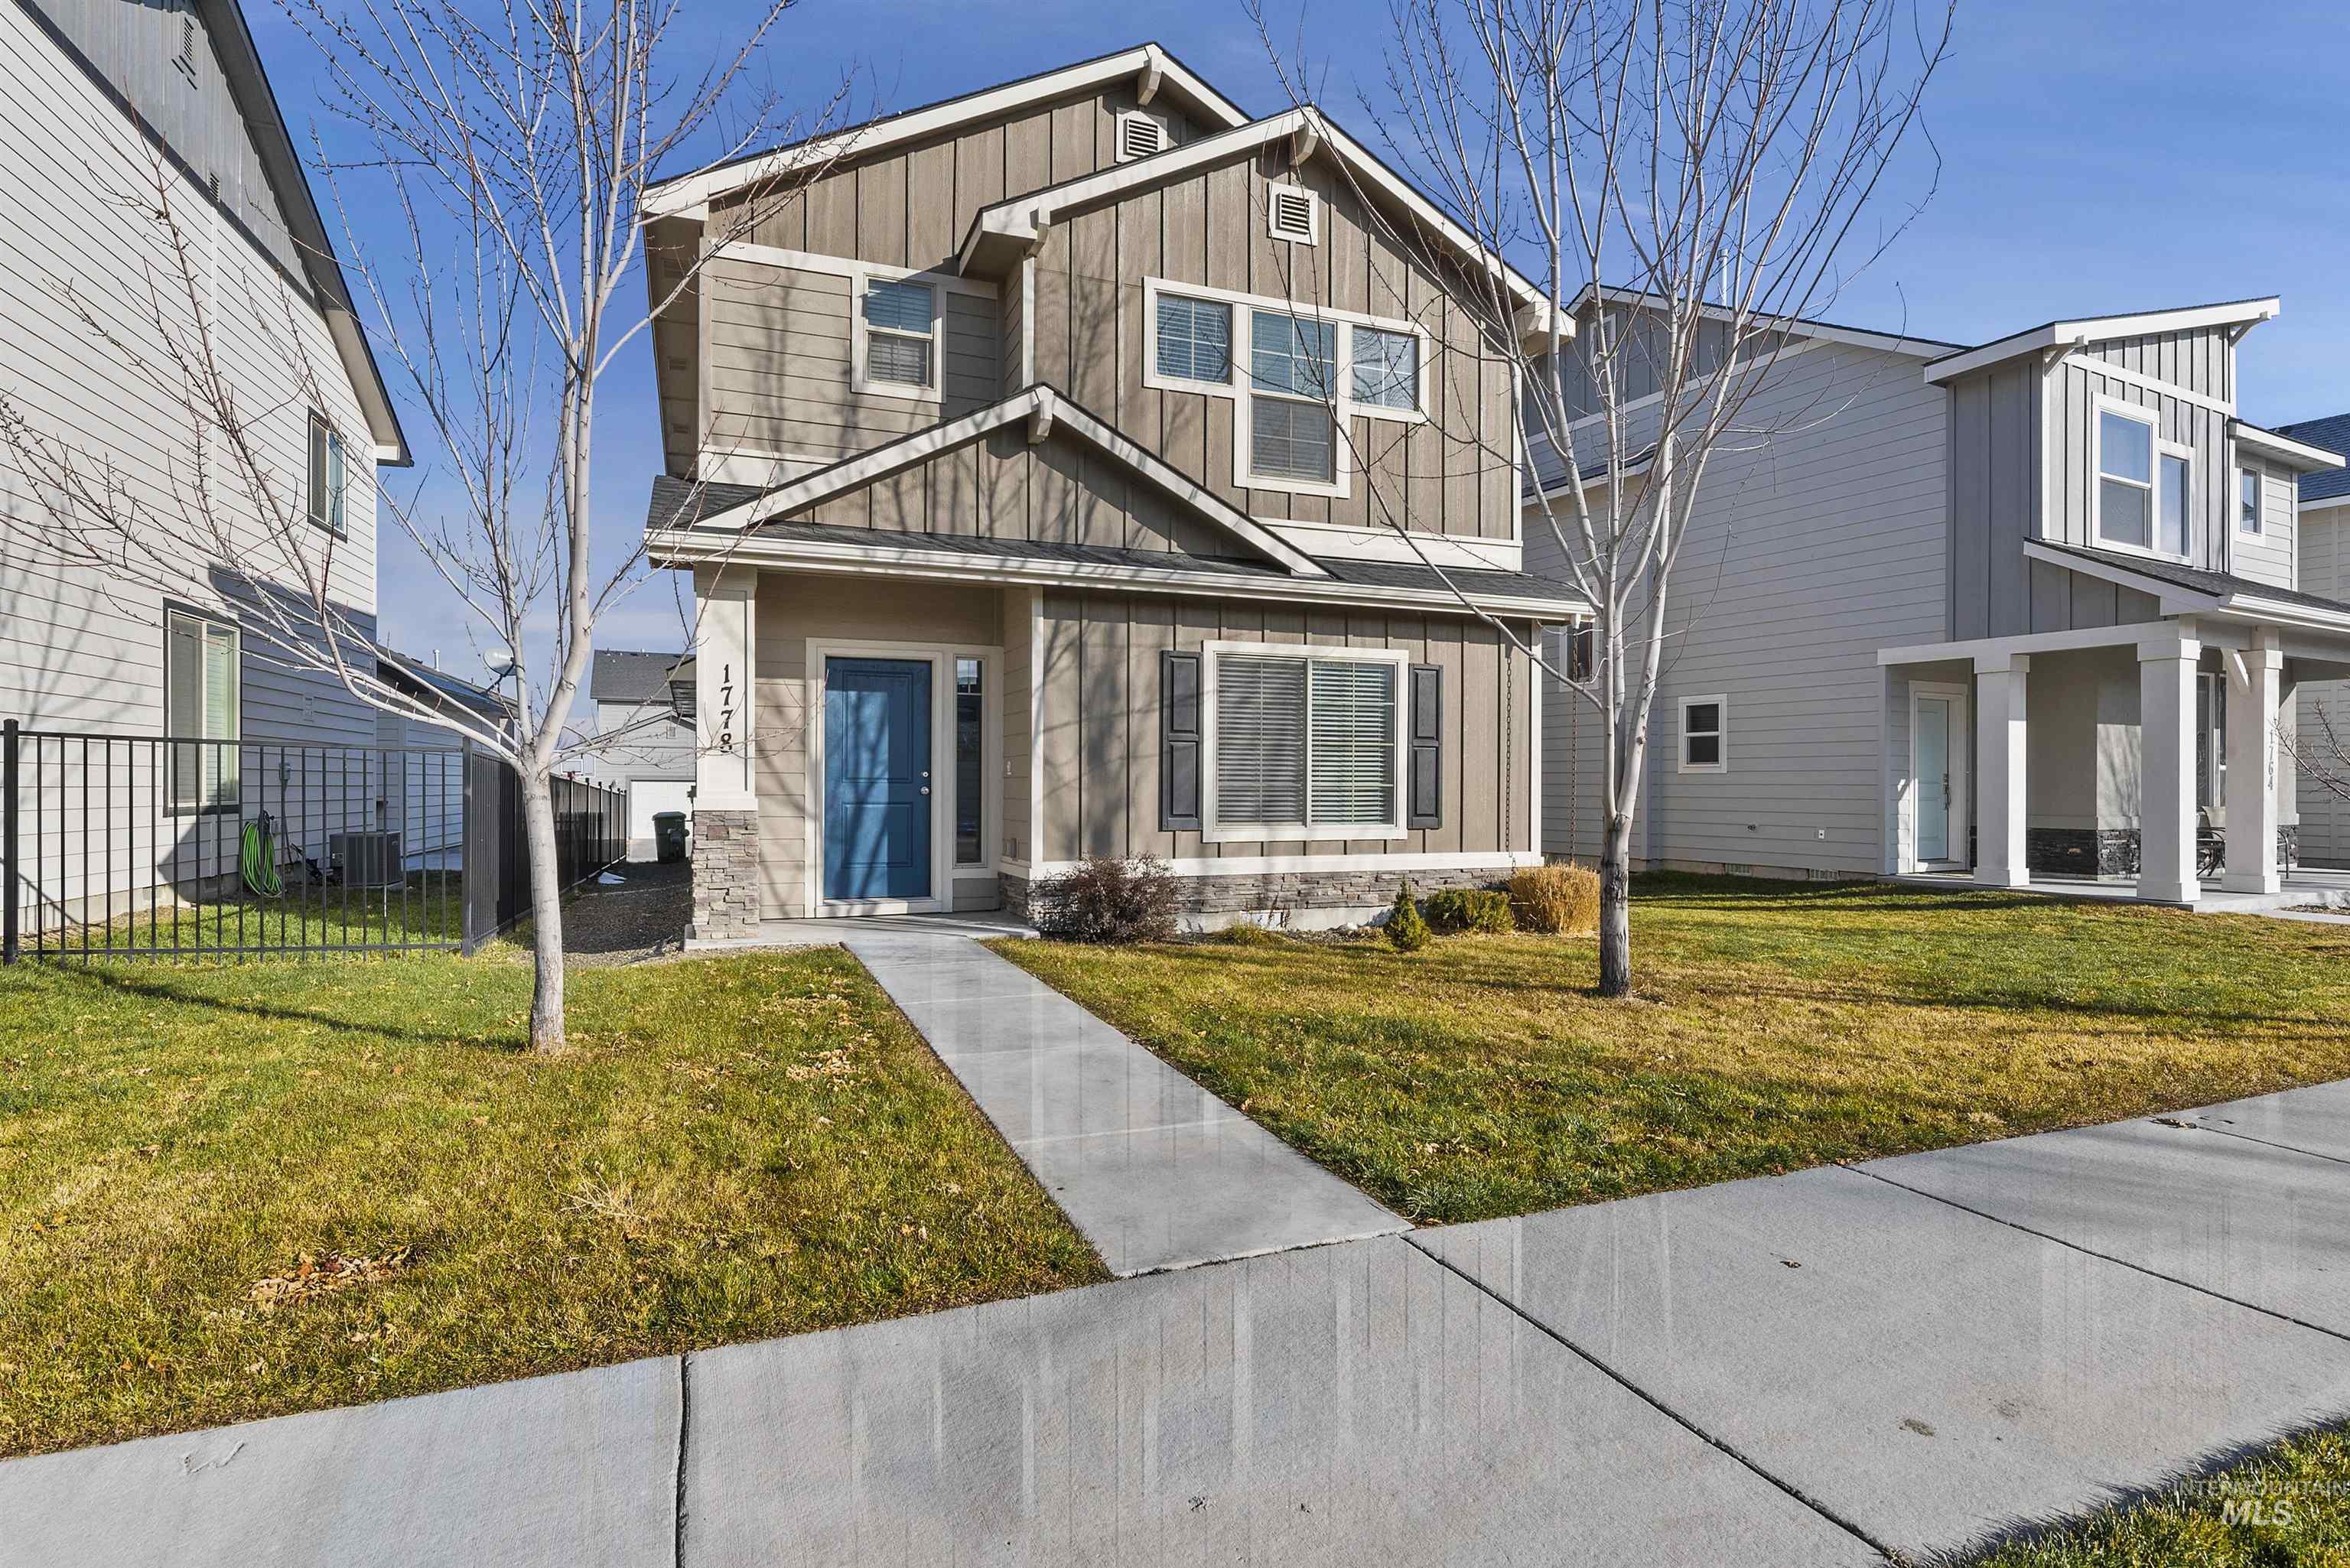 This newer, low maintenance home has a PRIME LOCATION! Spend less time commuting & more time relaxing. It has perfect freeway access and is close to everything- Downtown Boise or Nampa, Ten Mile Crossing, Wahooz/Roaring Springs, shopping, greenbelt, parks, ponds, and the airport. The open main level features 9’ ceilings, lots of light and a fireplace. Kitchen has granite countertops, pantry and breakfast bar next to an ample dining area. Also on the main floor is a 1/2 bath, coat closet, plus oversized laundry room with storage or mud bench potential. Upstairs, the master suite features walk-in closet & double vanity. Private back patio for outdoor enjoyment. A perfect place for first-time home owners, downsizing or investment property. - Alyssa Havens, Main: 208-484-0418, Cook & Company Realty, Main: 208-891-3298,